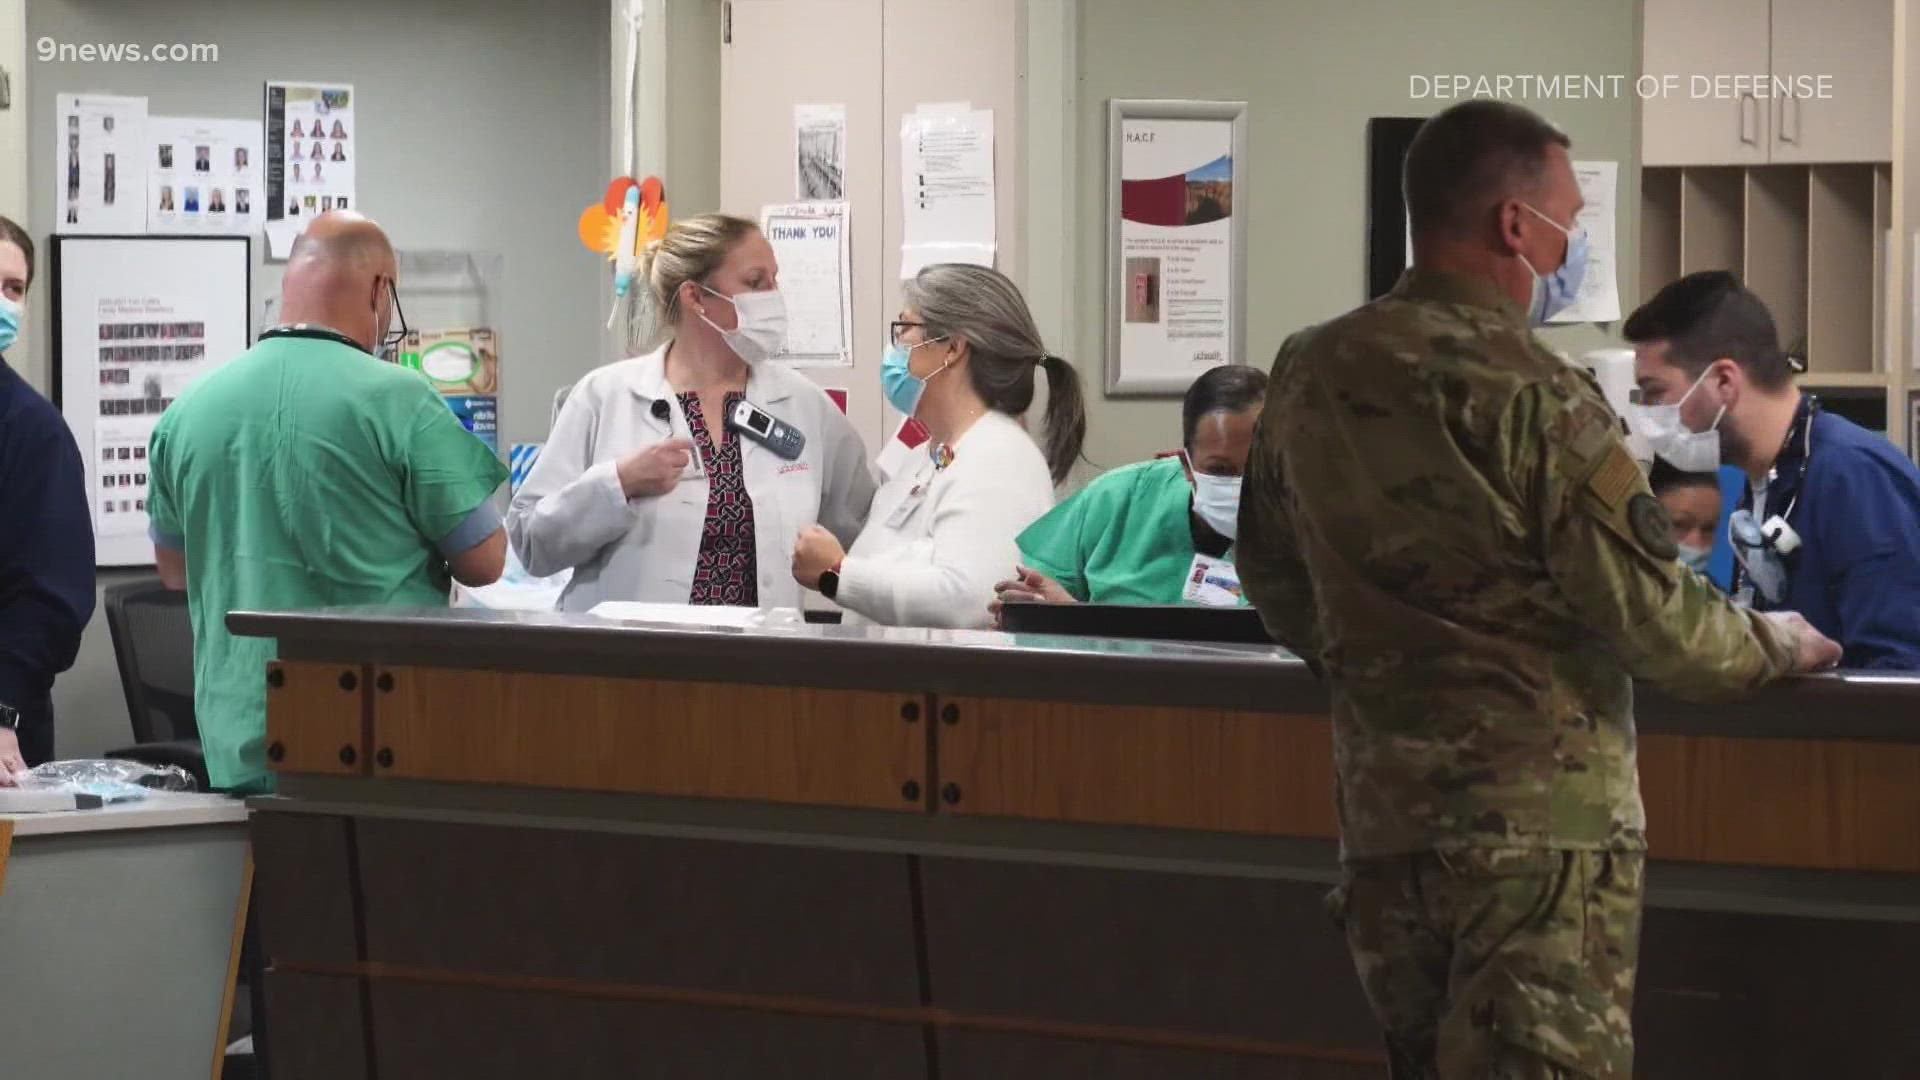 Colorado's fall COVID surge was so serious - the military was called in to help a hospital in Northern Colorado cope.